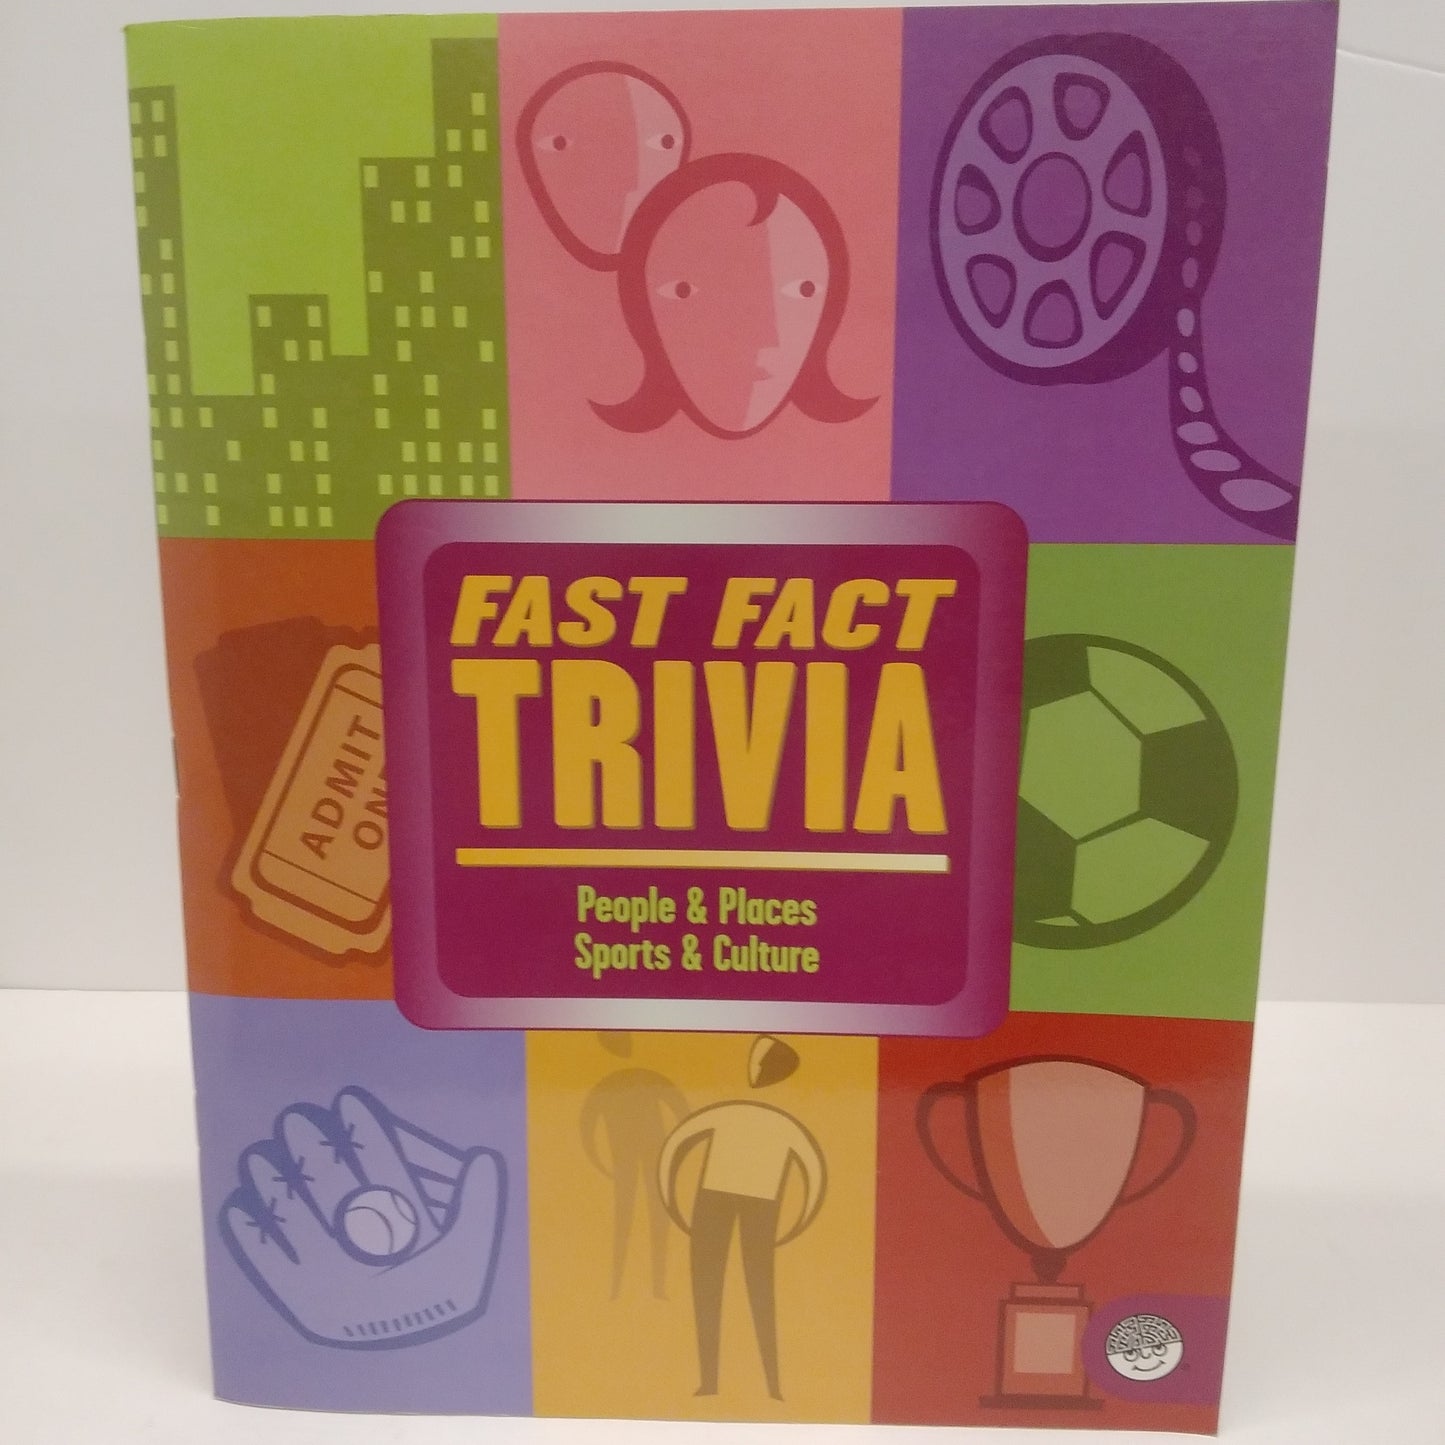 Fast Fact Trivia - People & Places